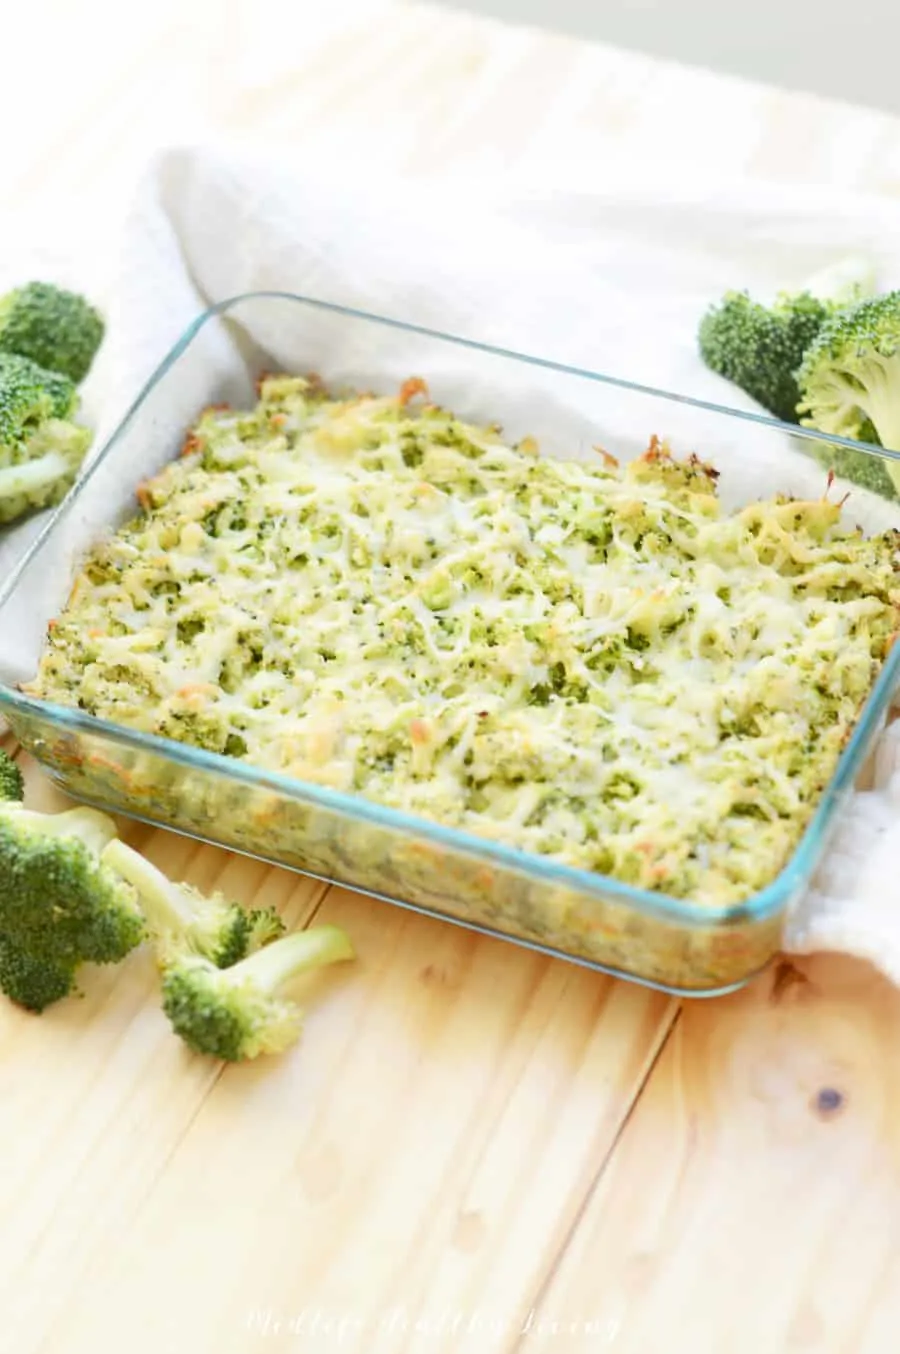 A vertical image showing the completed recipe for healthy broccoli parmesan dip.